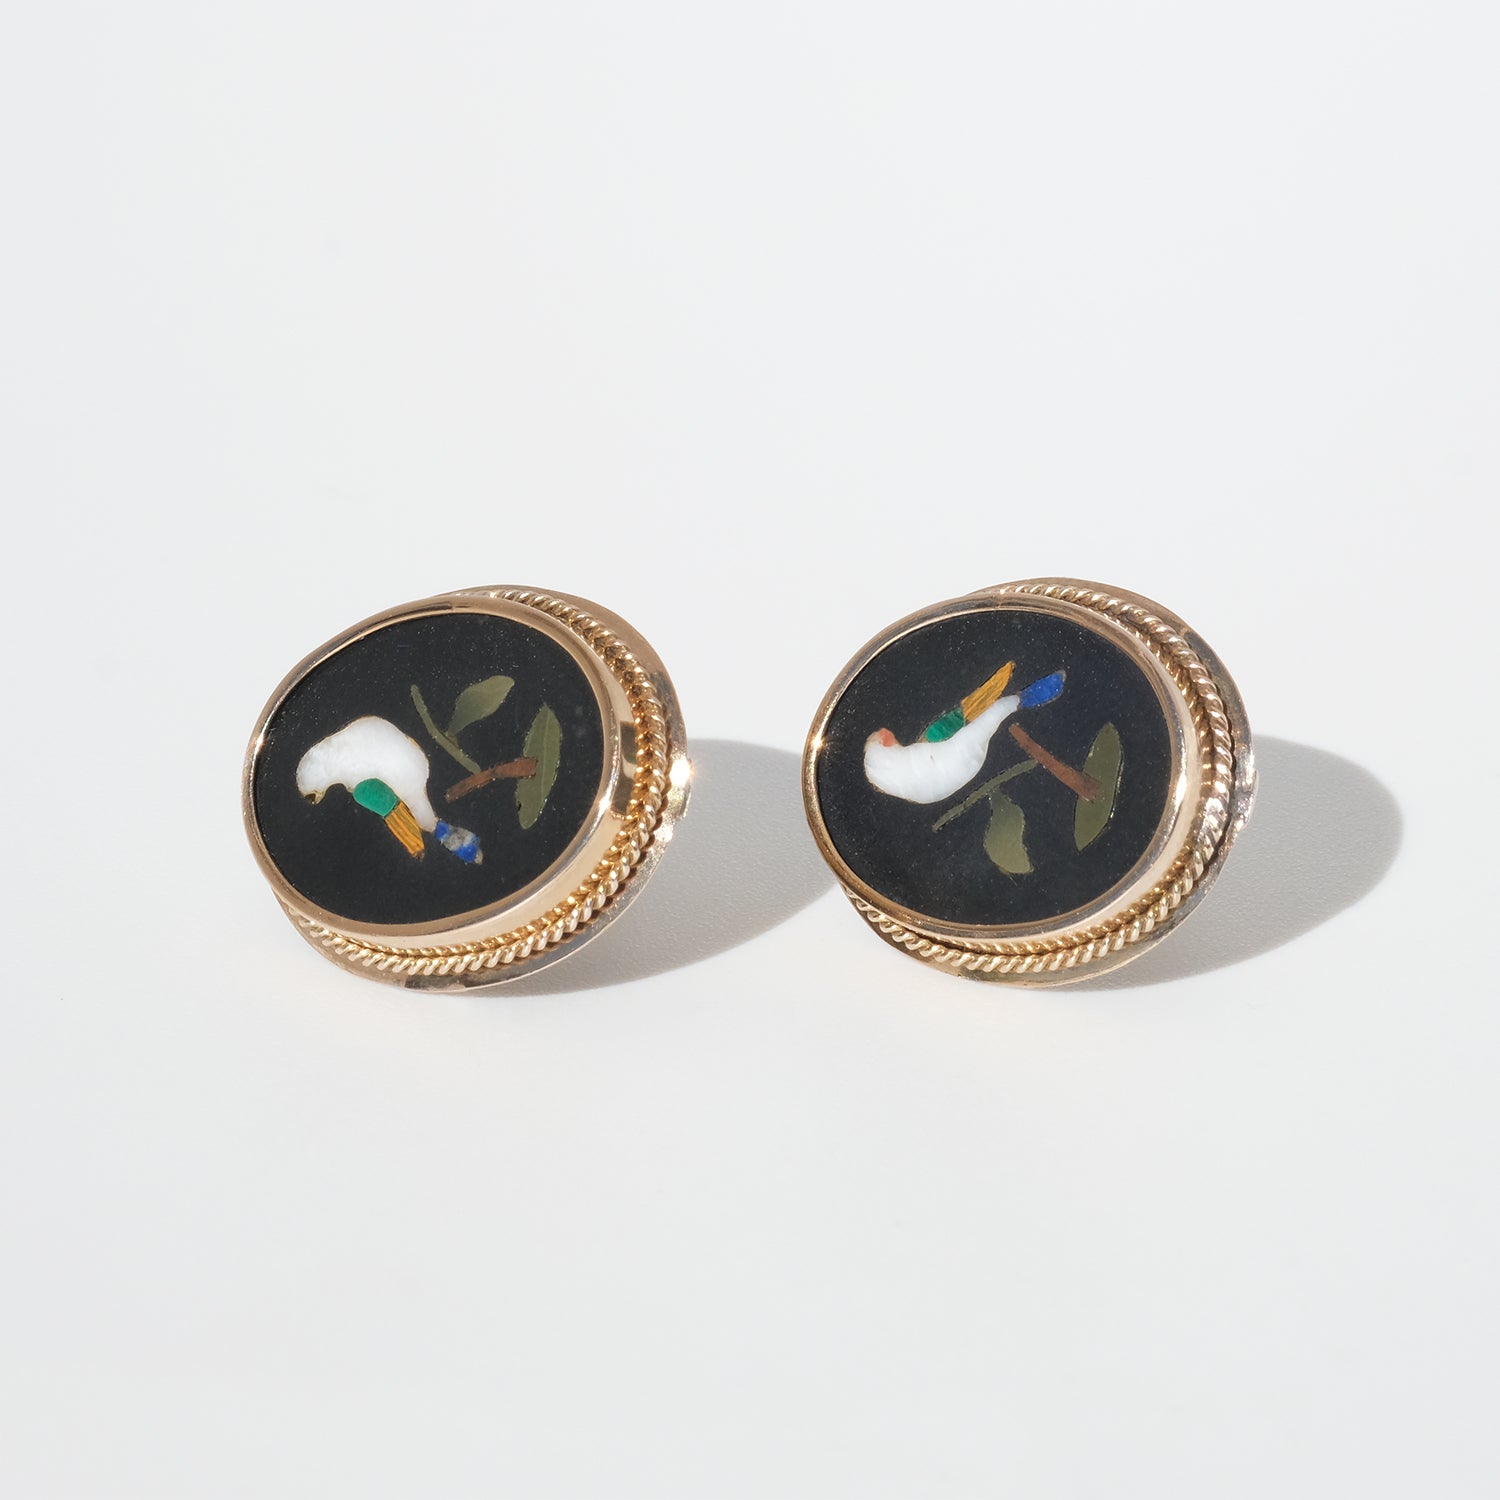 These earrings are made with the decorative technique Pietra Dura, low grade gold and silver. Pietra Dura is the art of carving stones, and in this case the decorative stone pieces show beautiful birds in the colors of white, green, blue and orange,